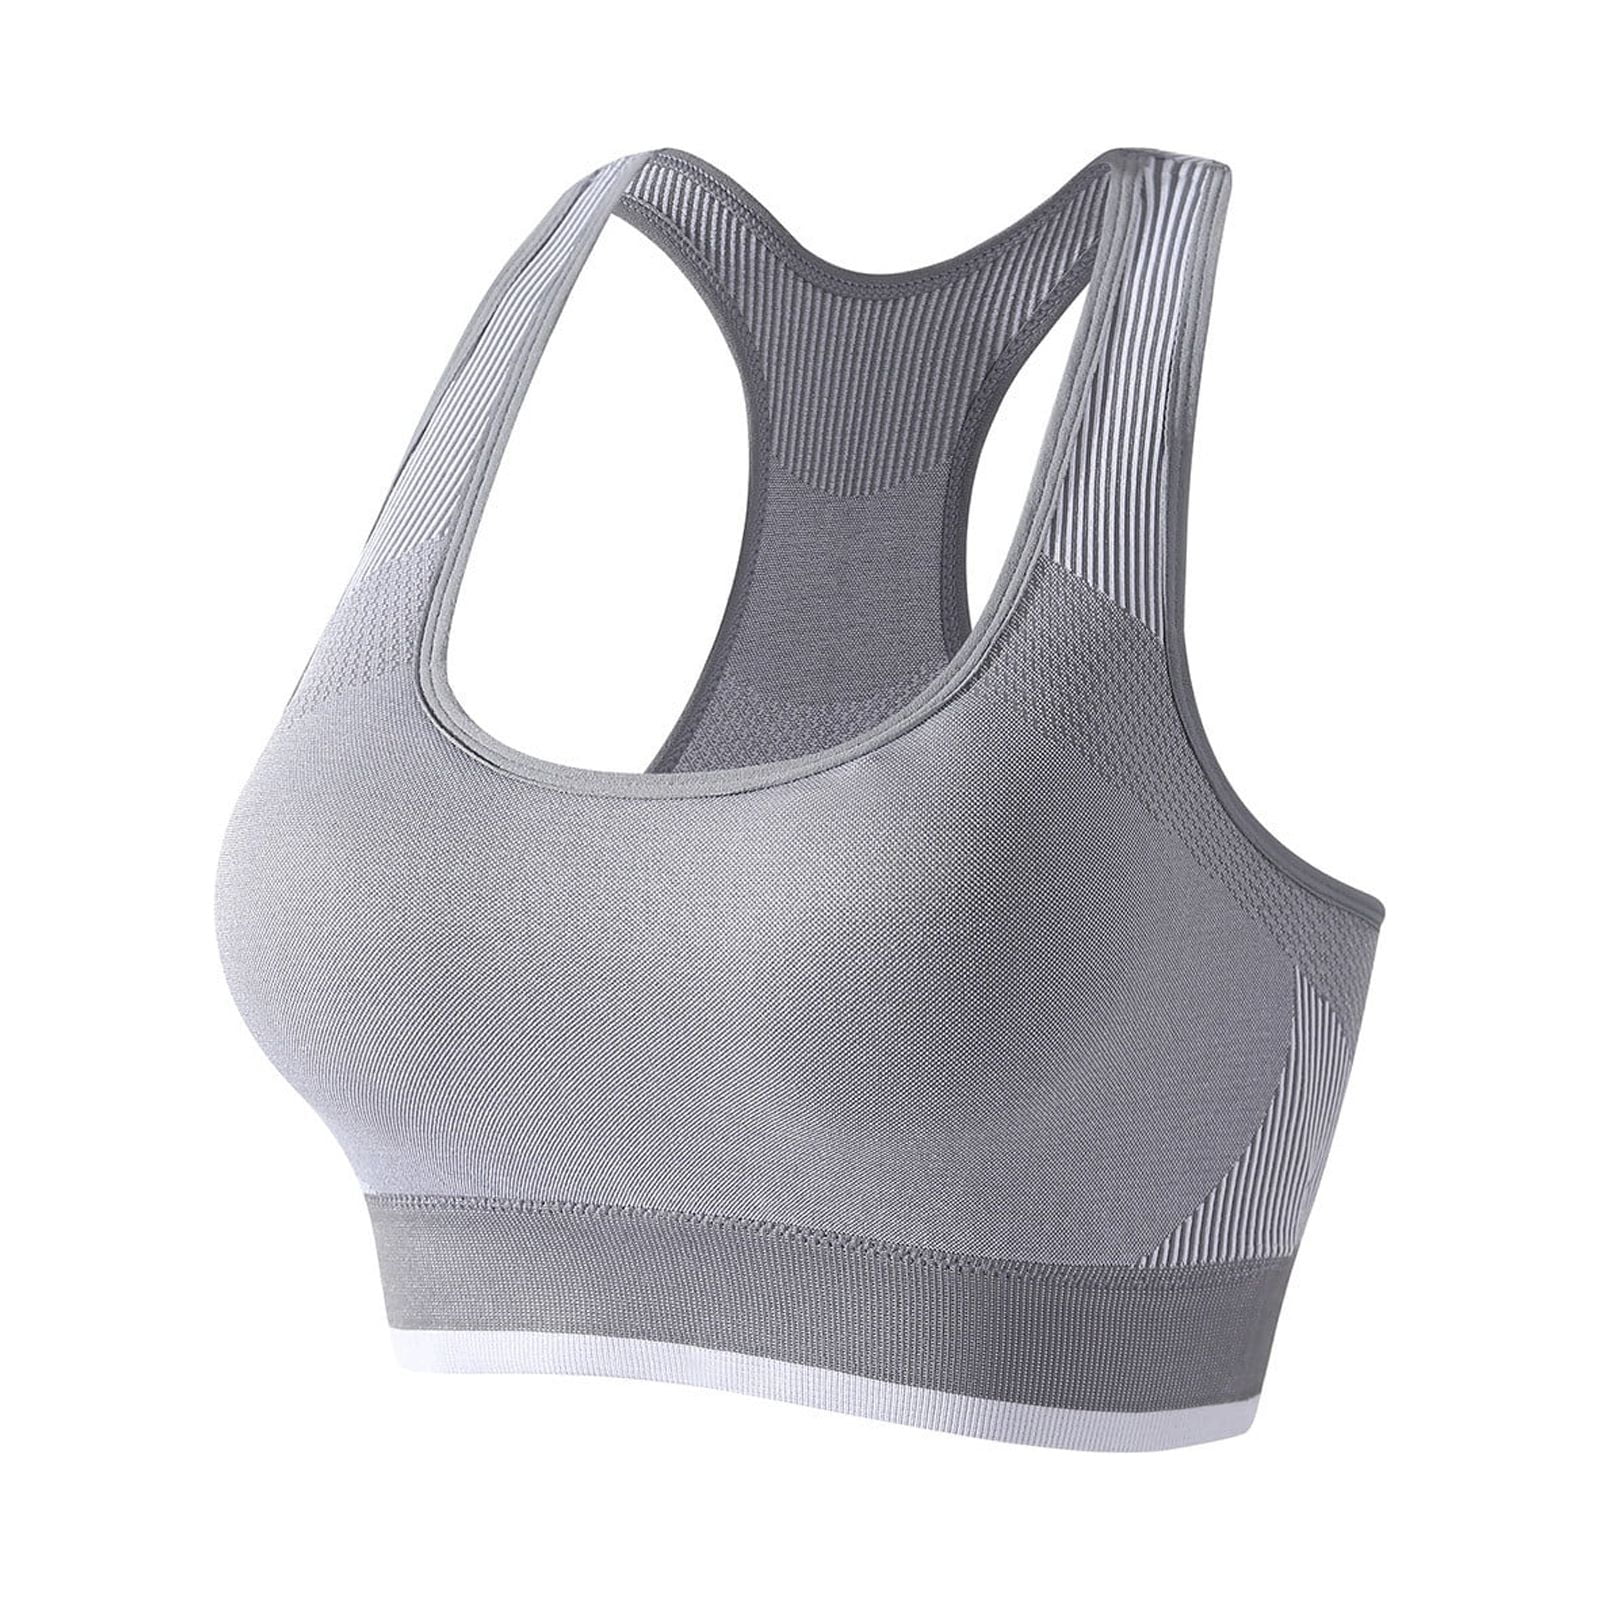 Buy online Grey Nylon Sports Bra from lingerie for Women by Parkha for ₹349  at 79% off